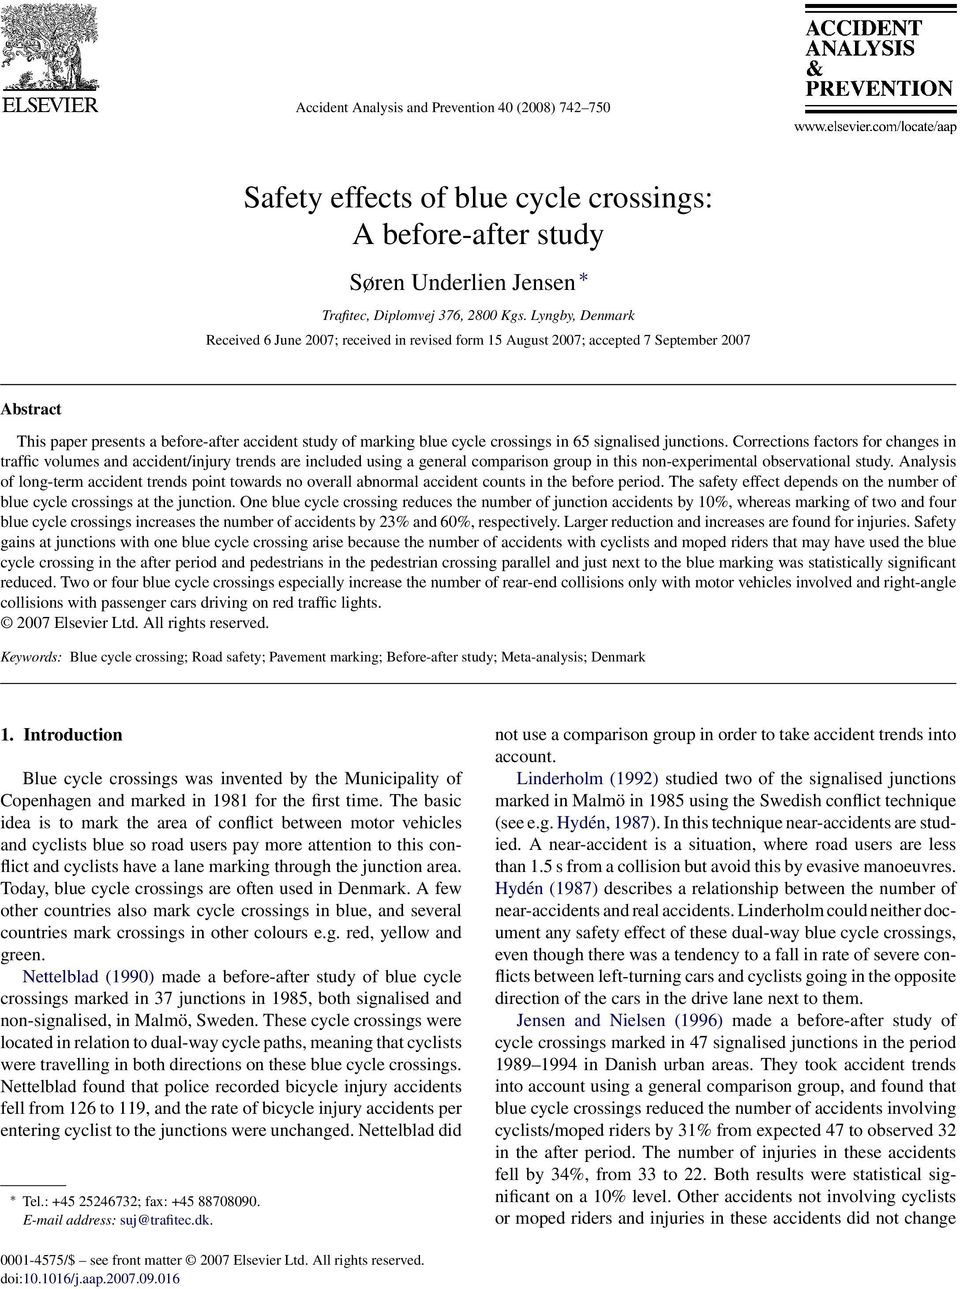 65 signalised junctions. Corrections factors for changes in traffic volumes and accident/injury trends are included using a general comparison group in this non-experimental observational study.